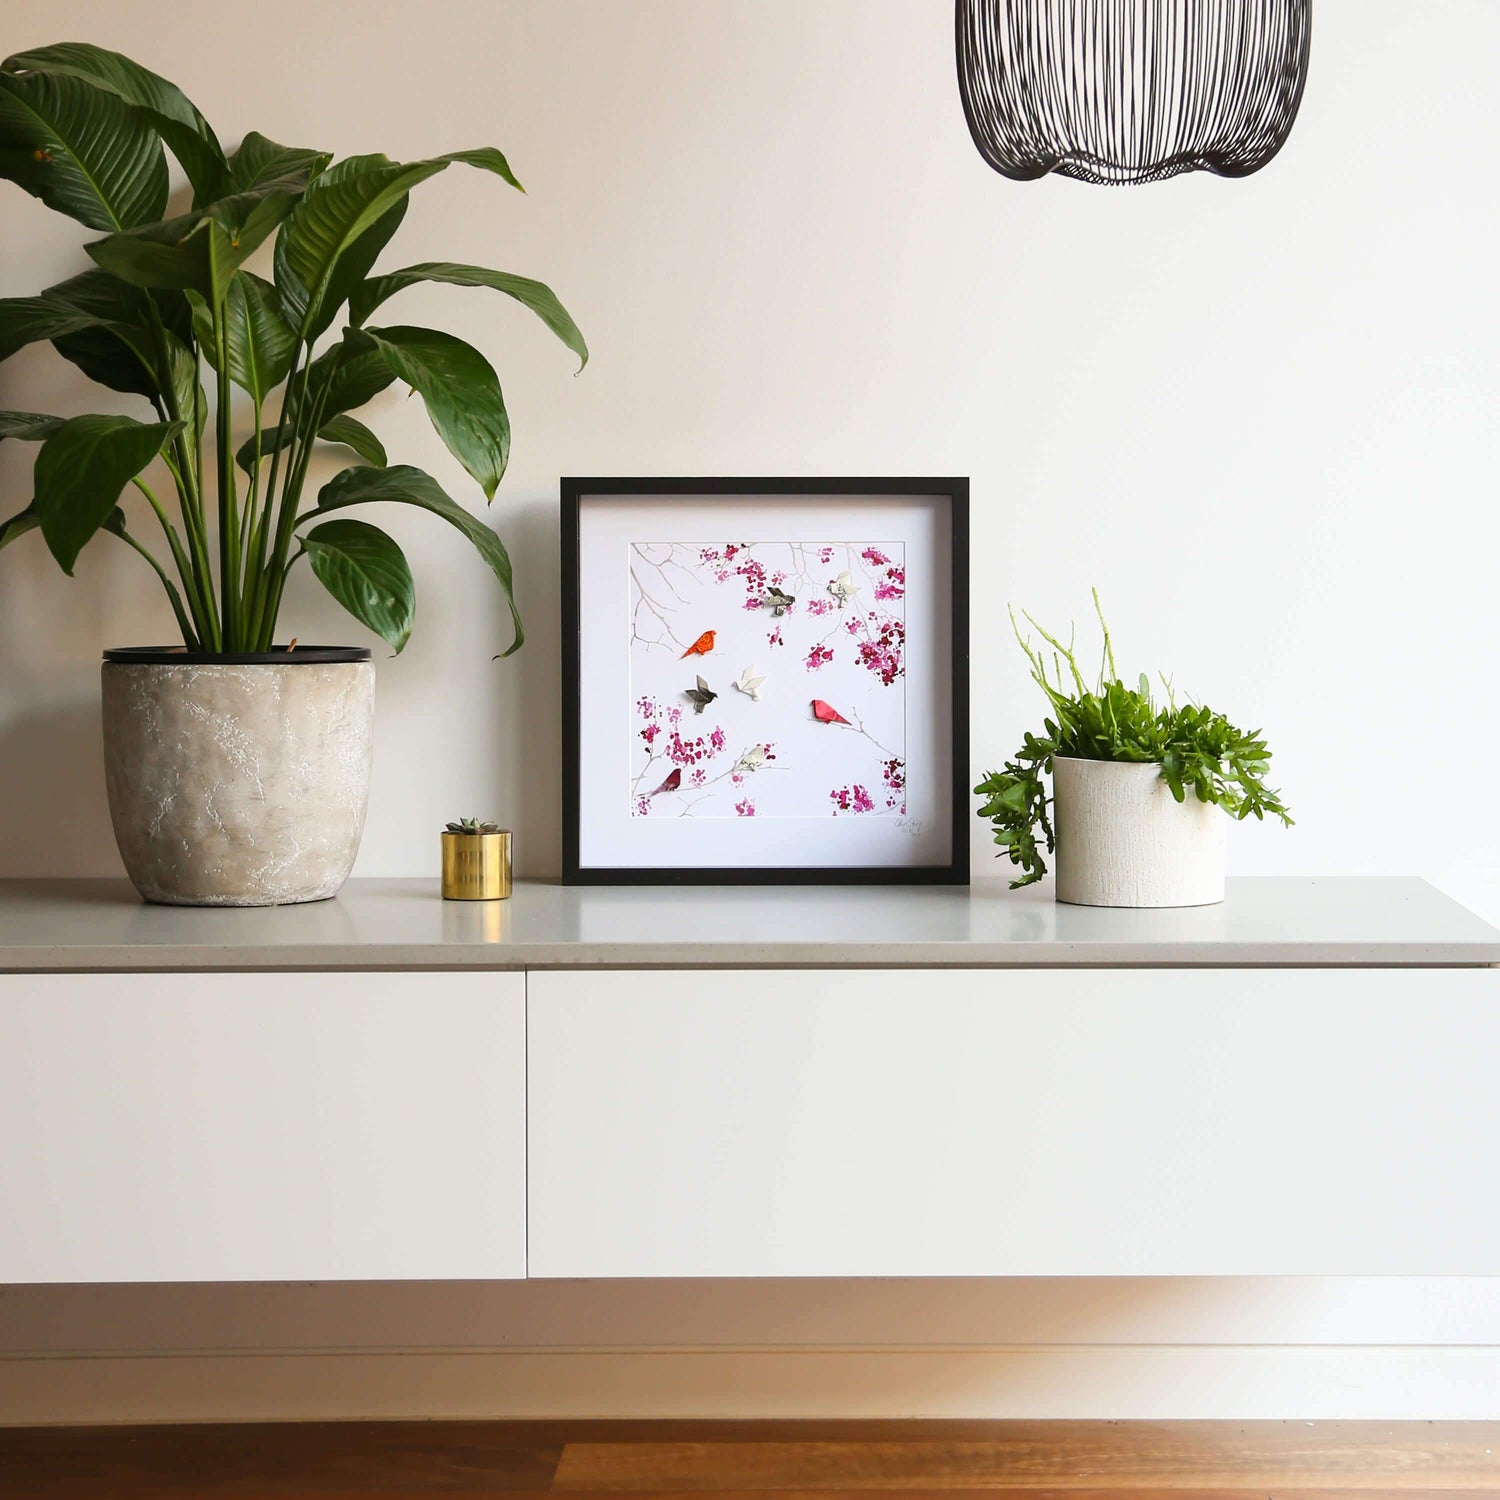 Large Black Frame Painted Cherry Blossom